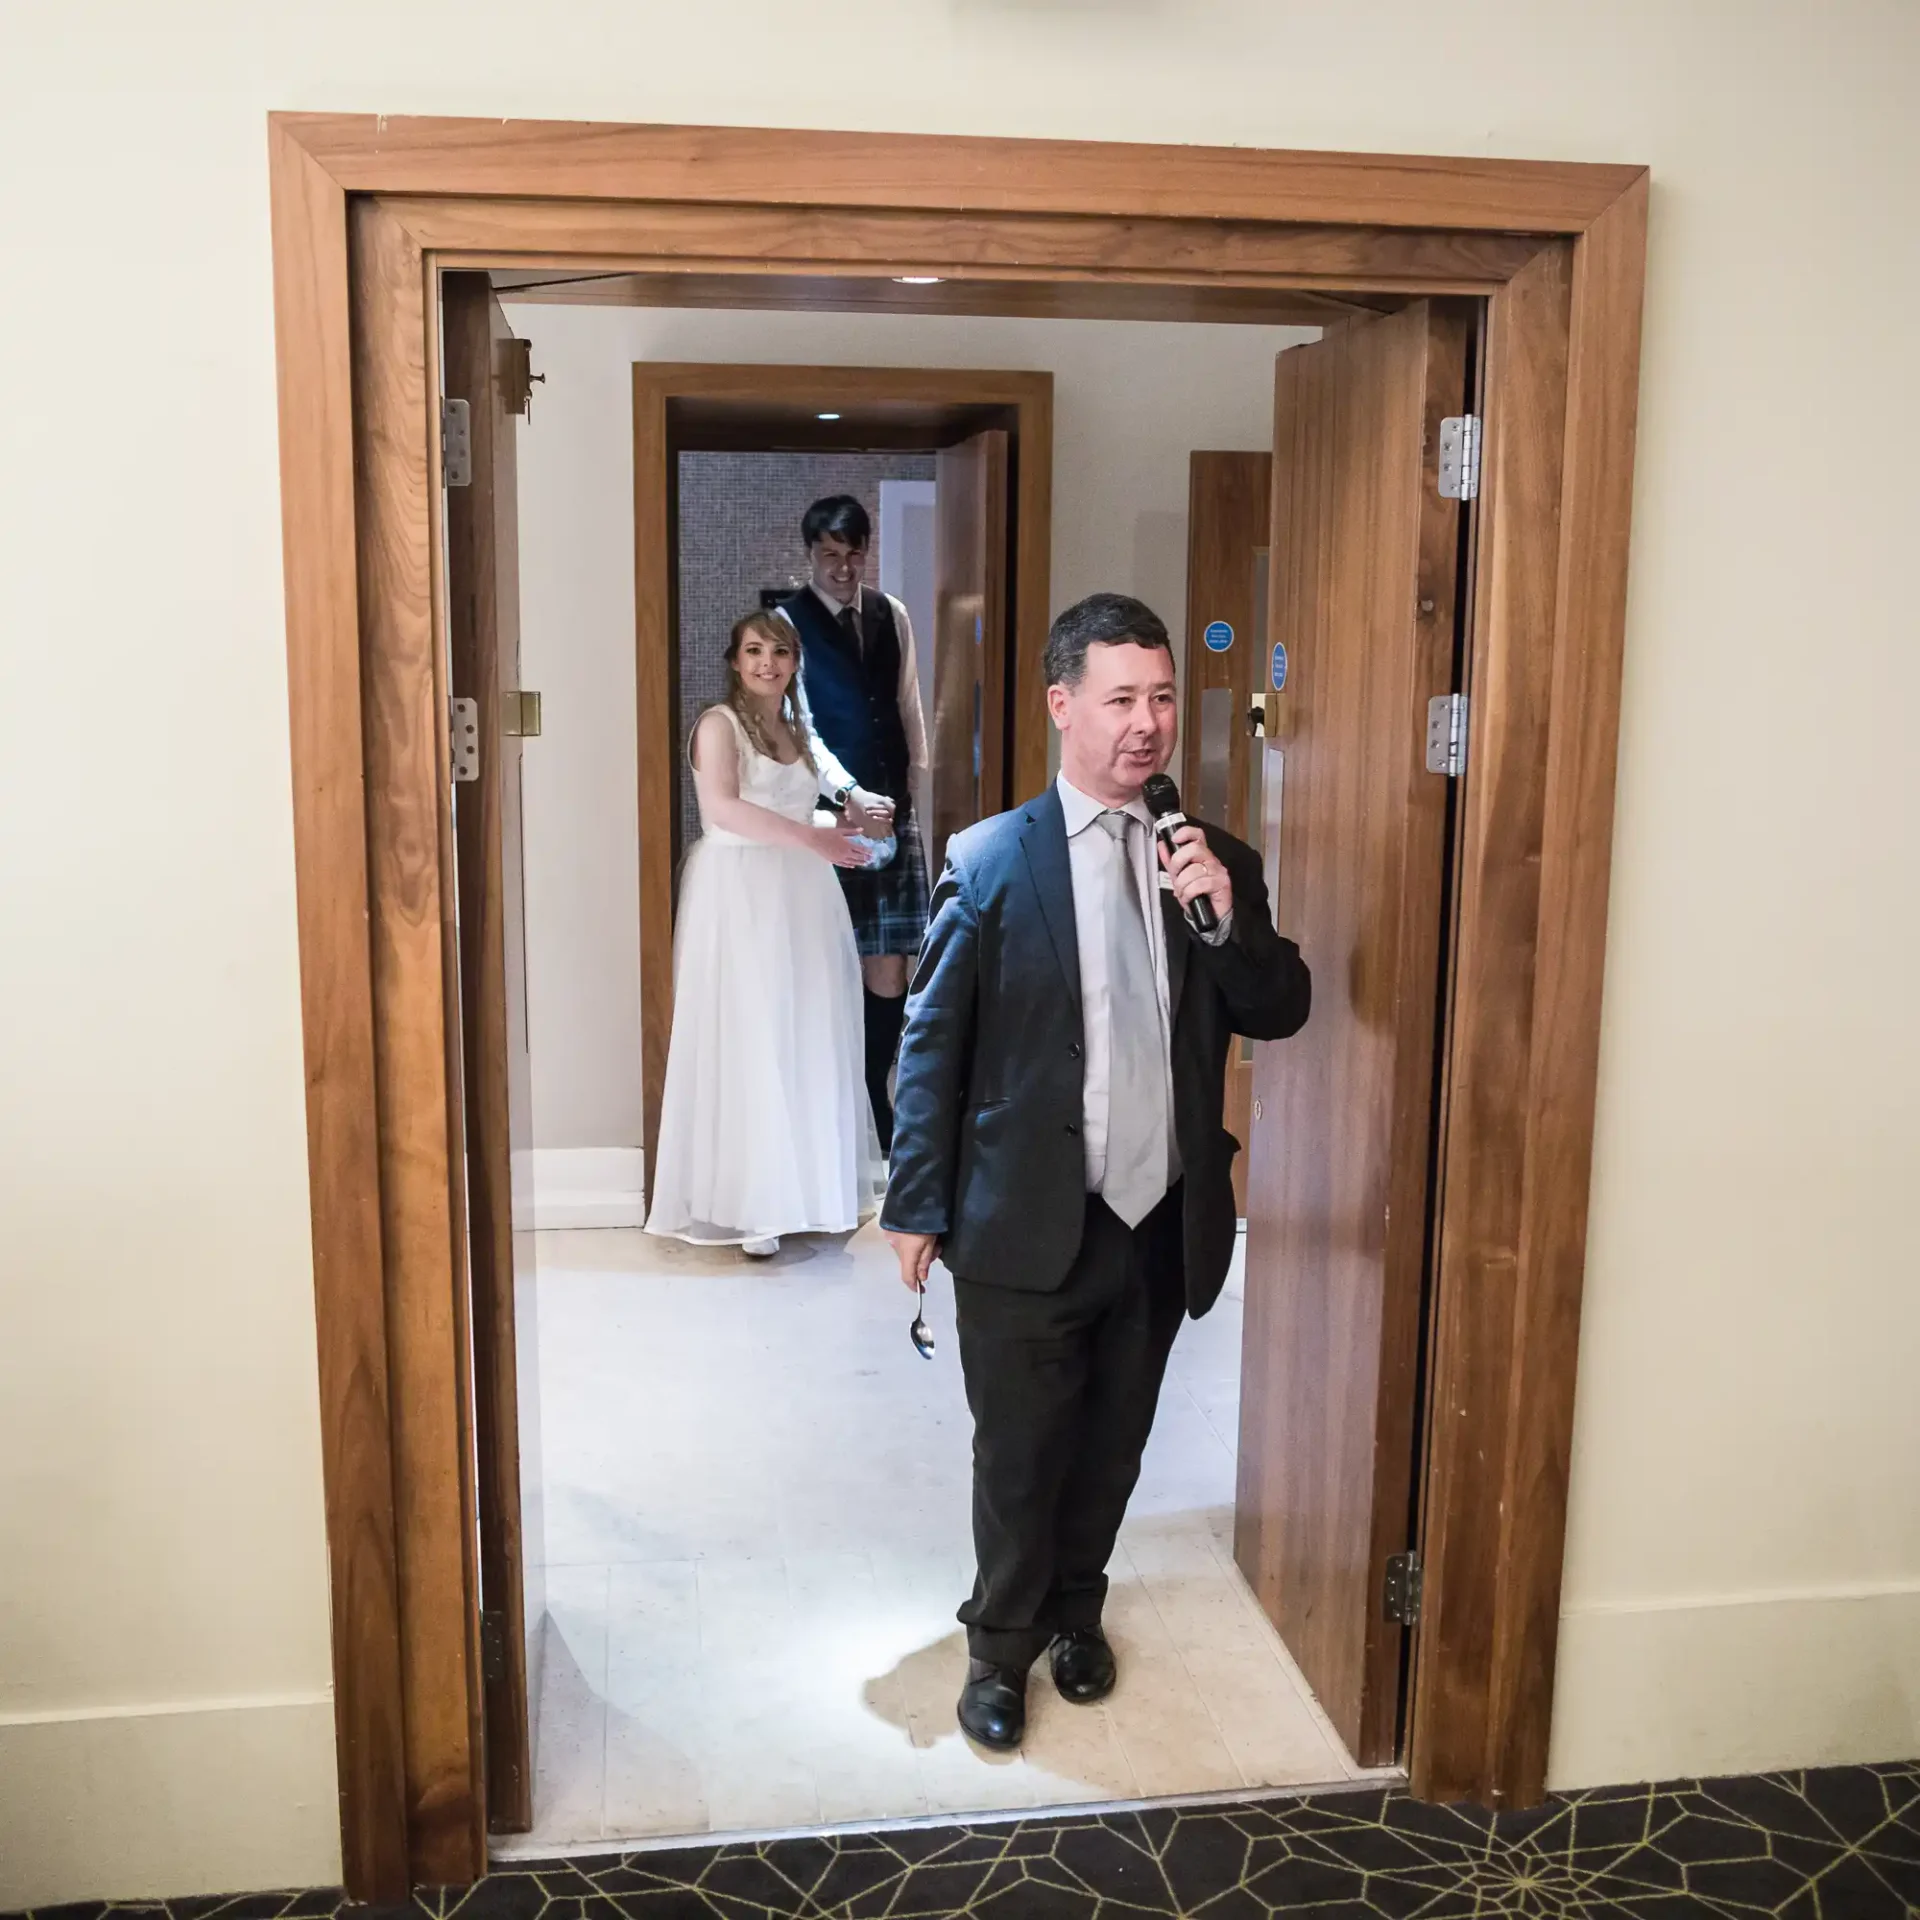 A man in a suit exits a room talking into a microphone, while a couple in wedding attire stands inside the doorway behind him.